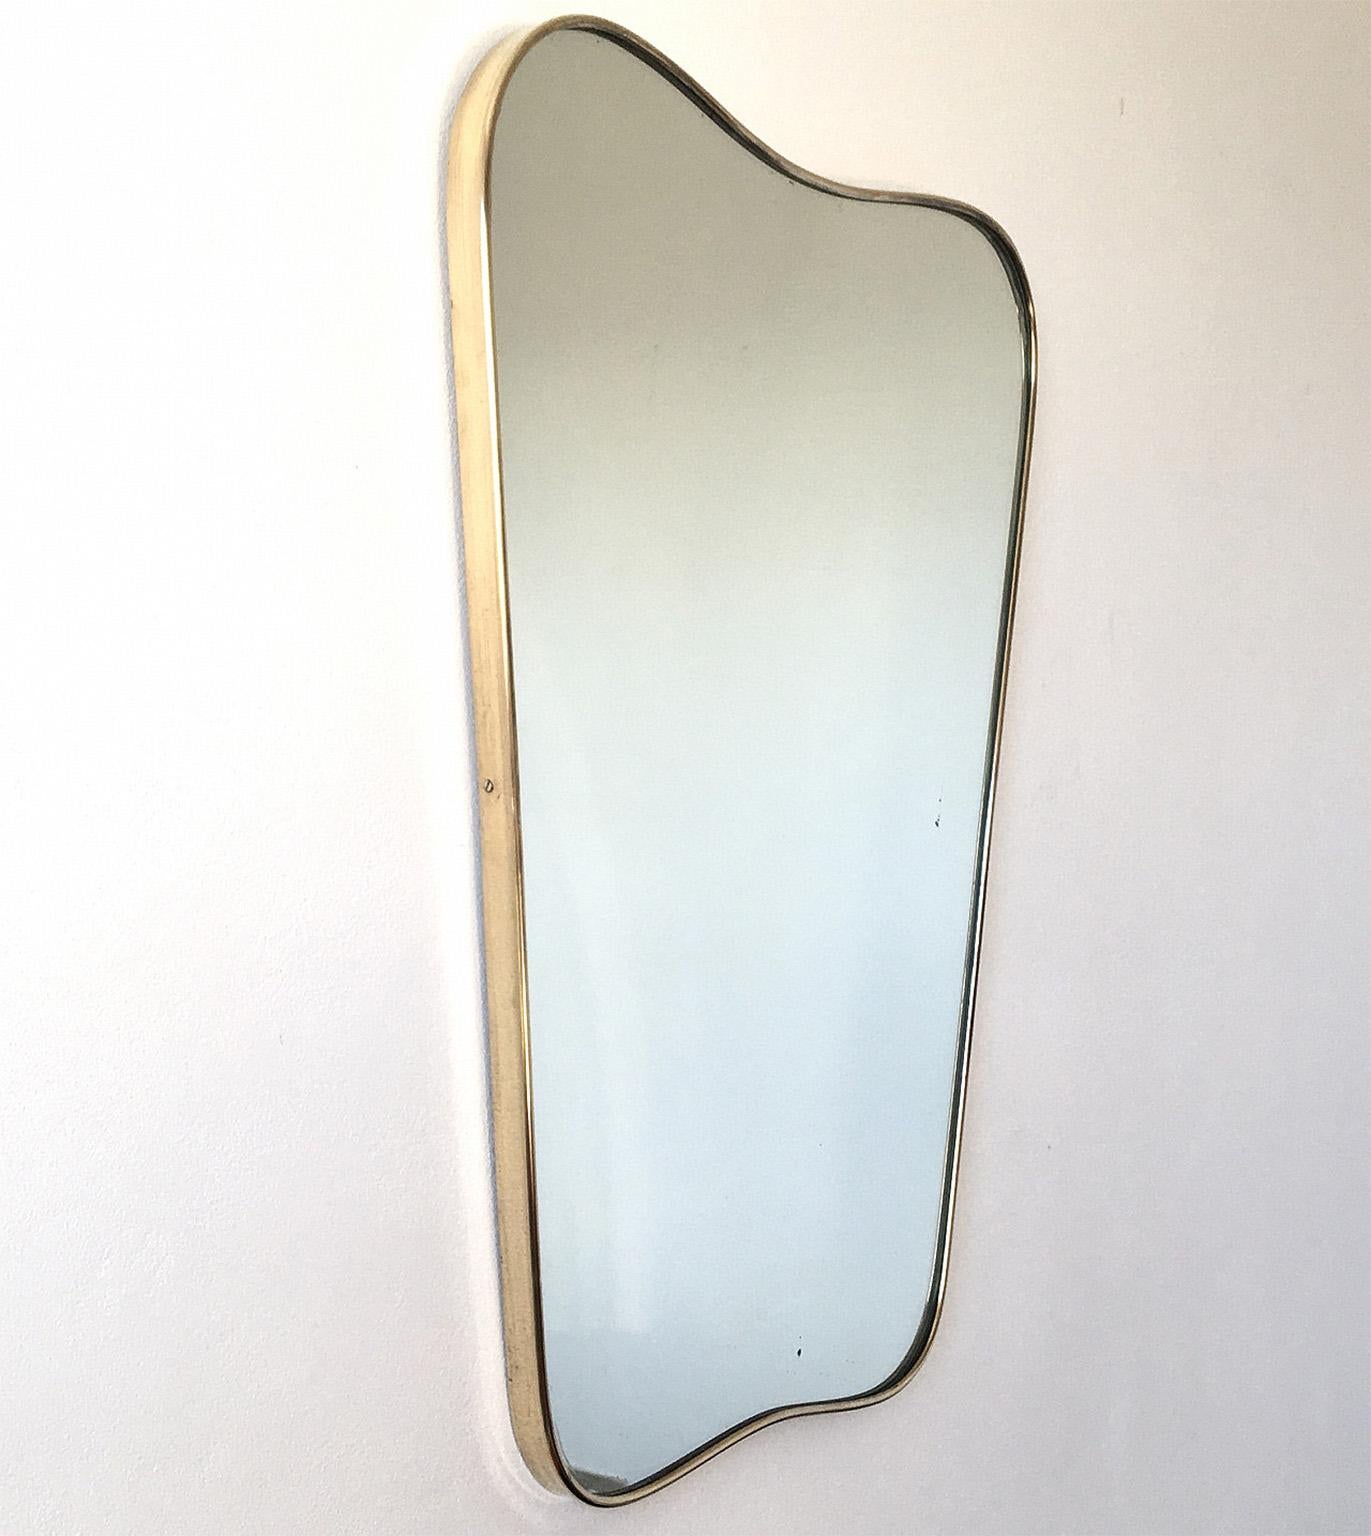 Elegant mirror with Brass frame with typical Gio Ponti sinuos curves and beautiful proportions
Original brass patina, 
Original vintage mirror.